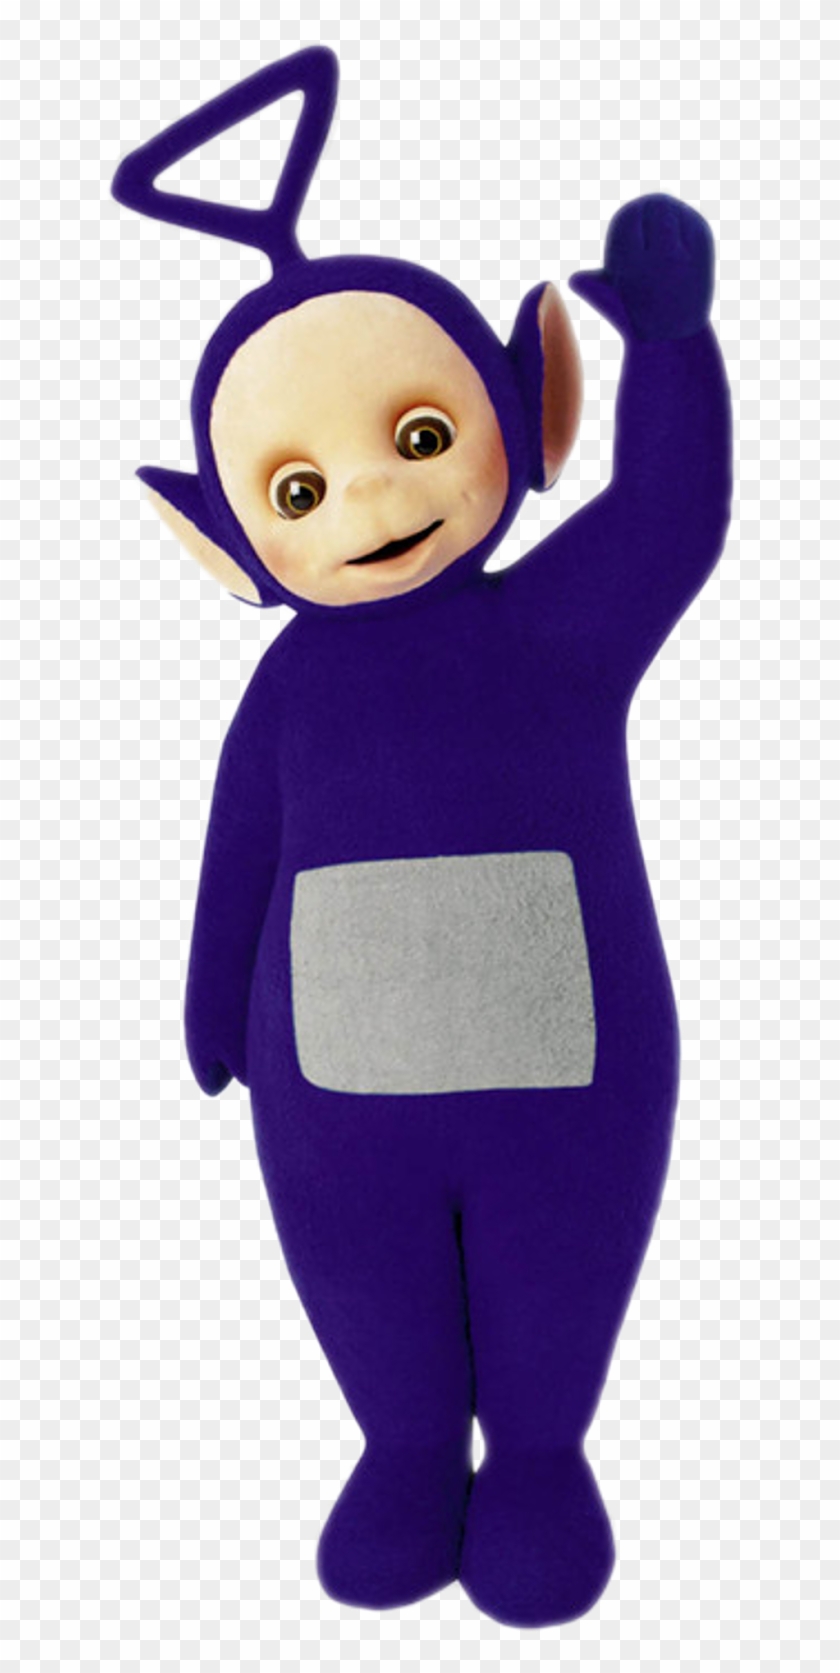 Teletubbies - Teletubbies Tinky Winky Png, Transparent Png - 1200x1600 ...